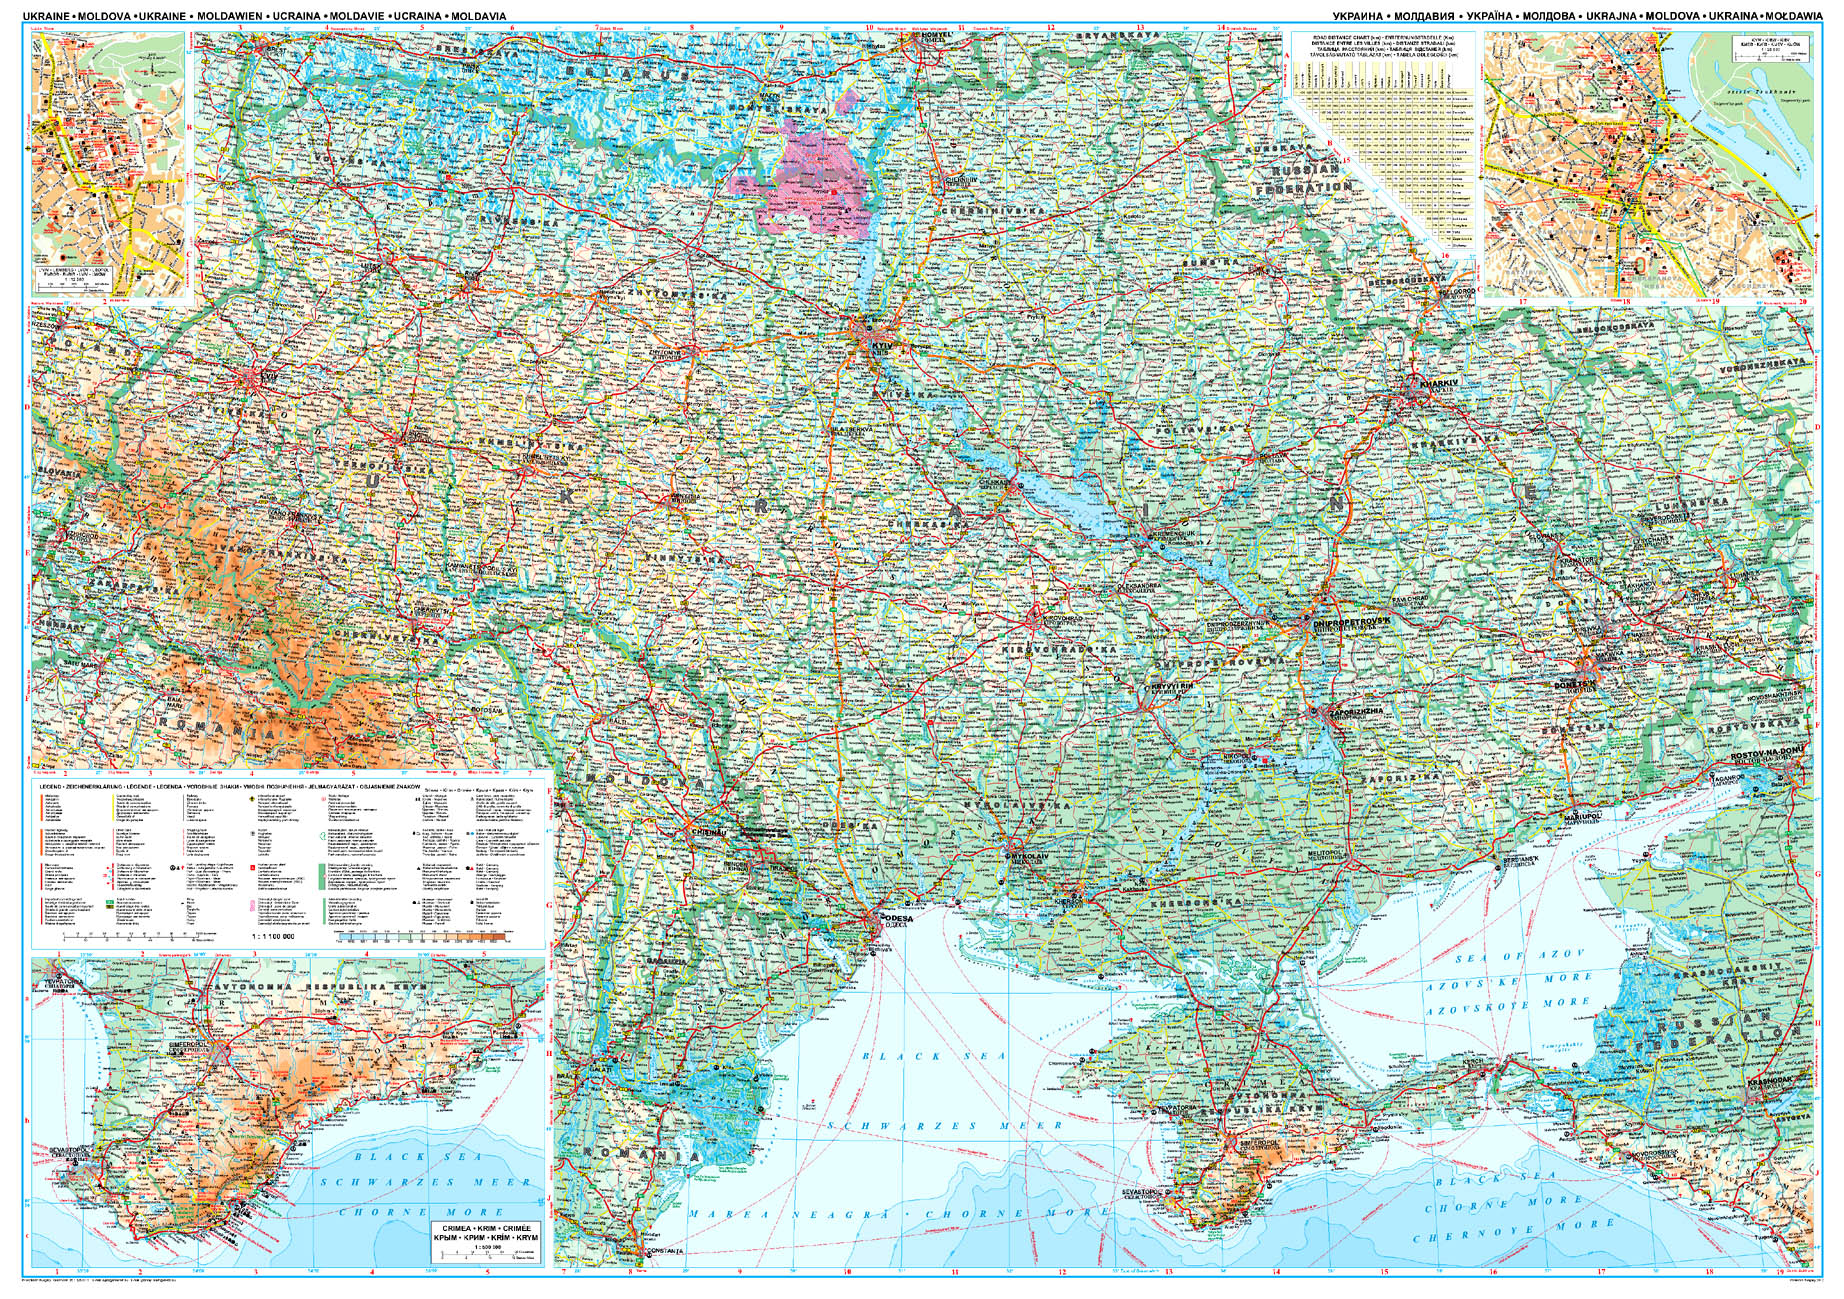 Area covered by the map of Ukraine